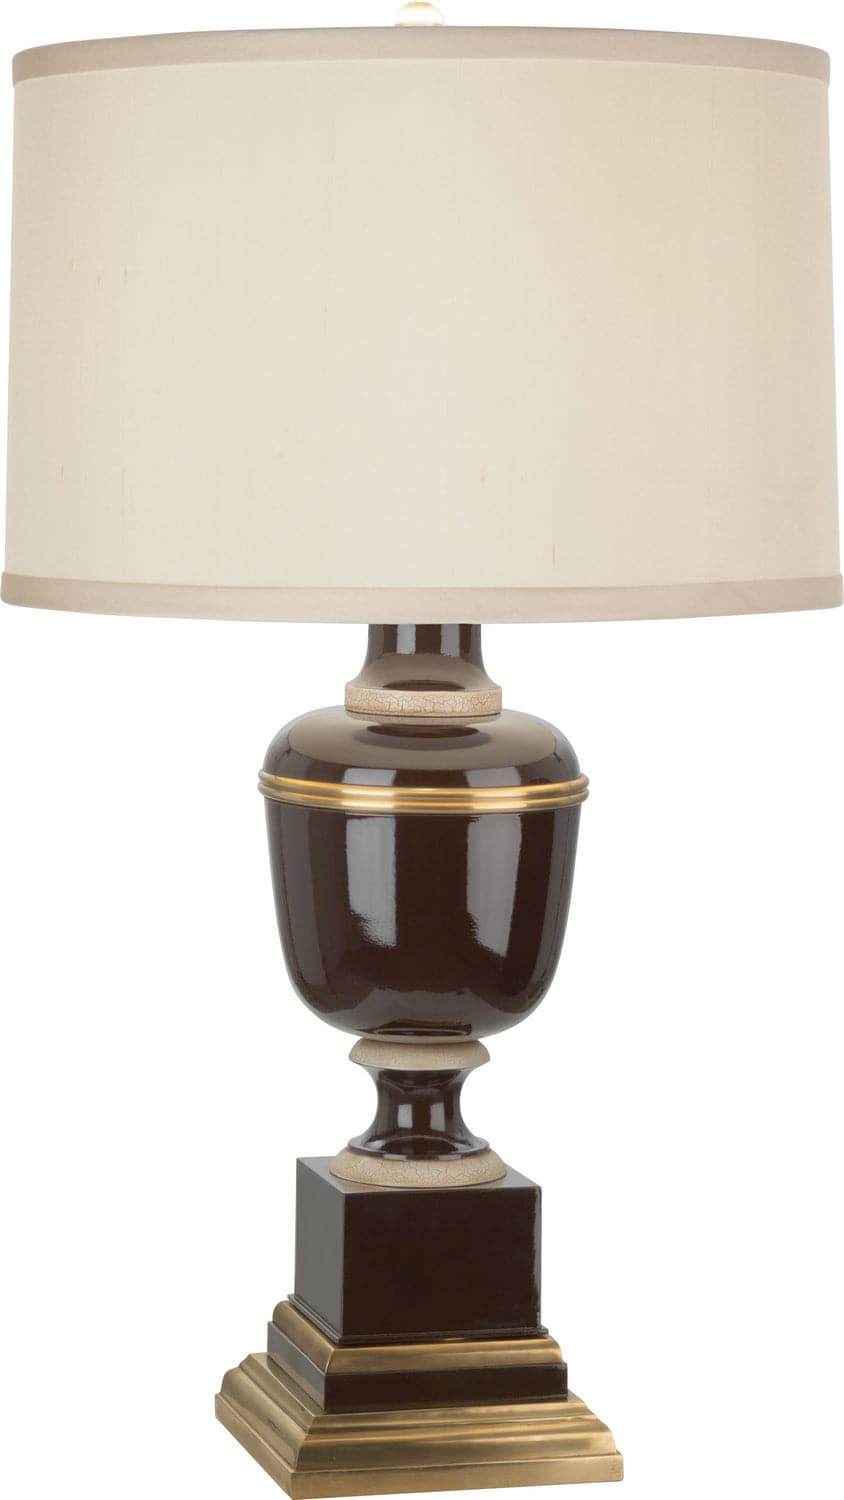 Robert Abbey - 2506X - One Light Accent Lamp - Annika - Chocolate Lacquered Paint w/Natural Brass and Ivory Crackle